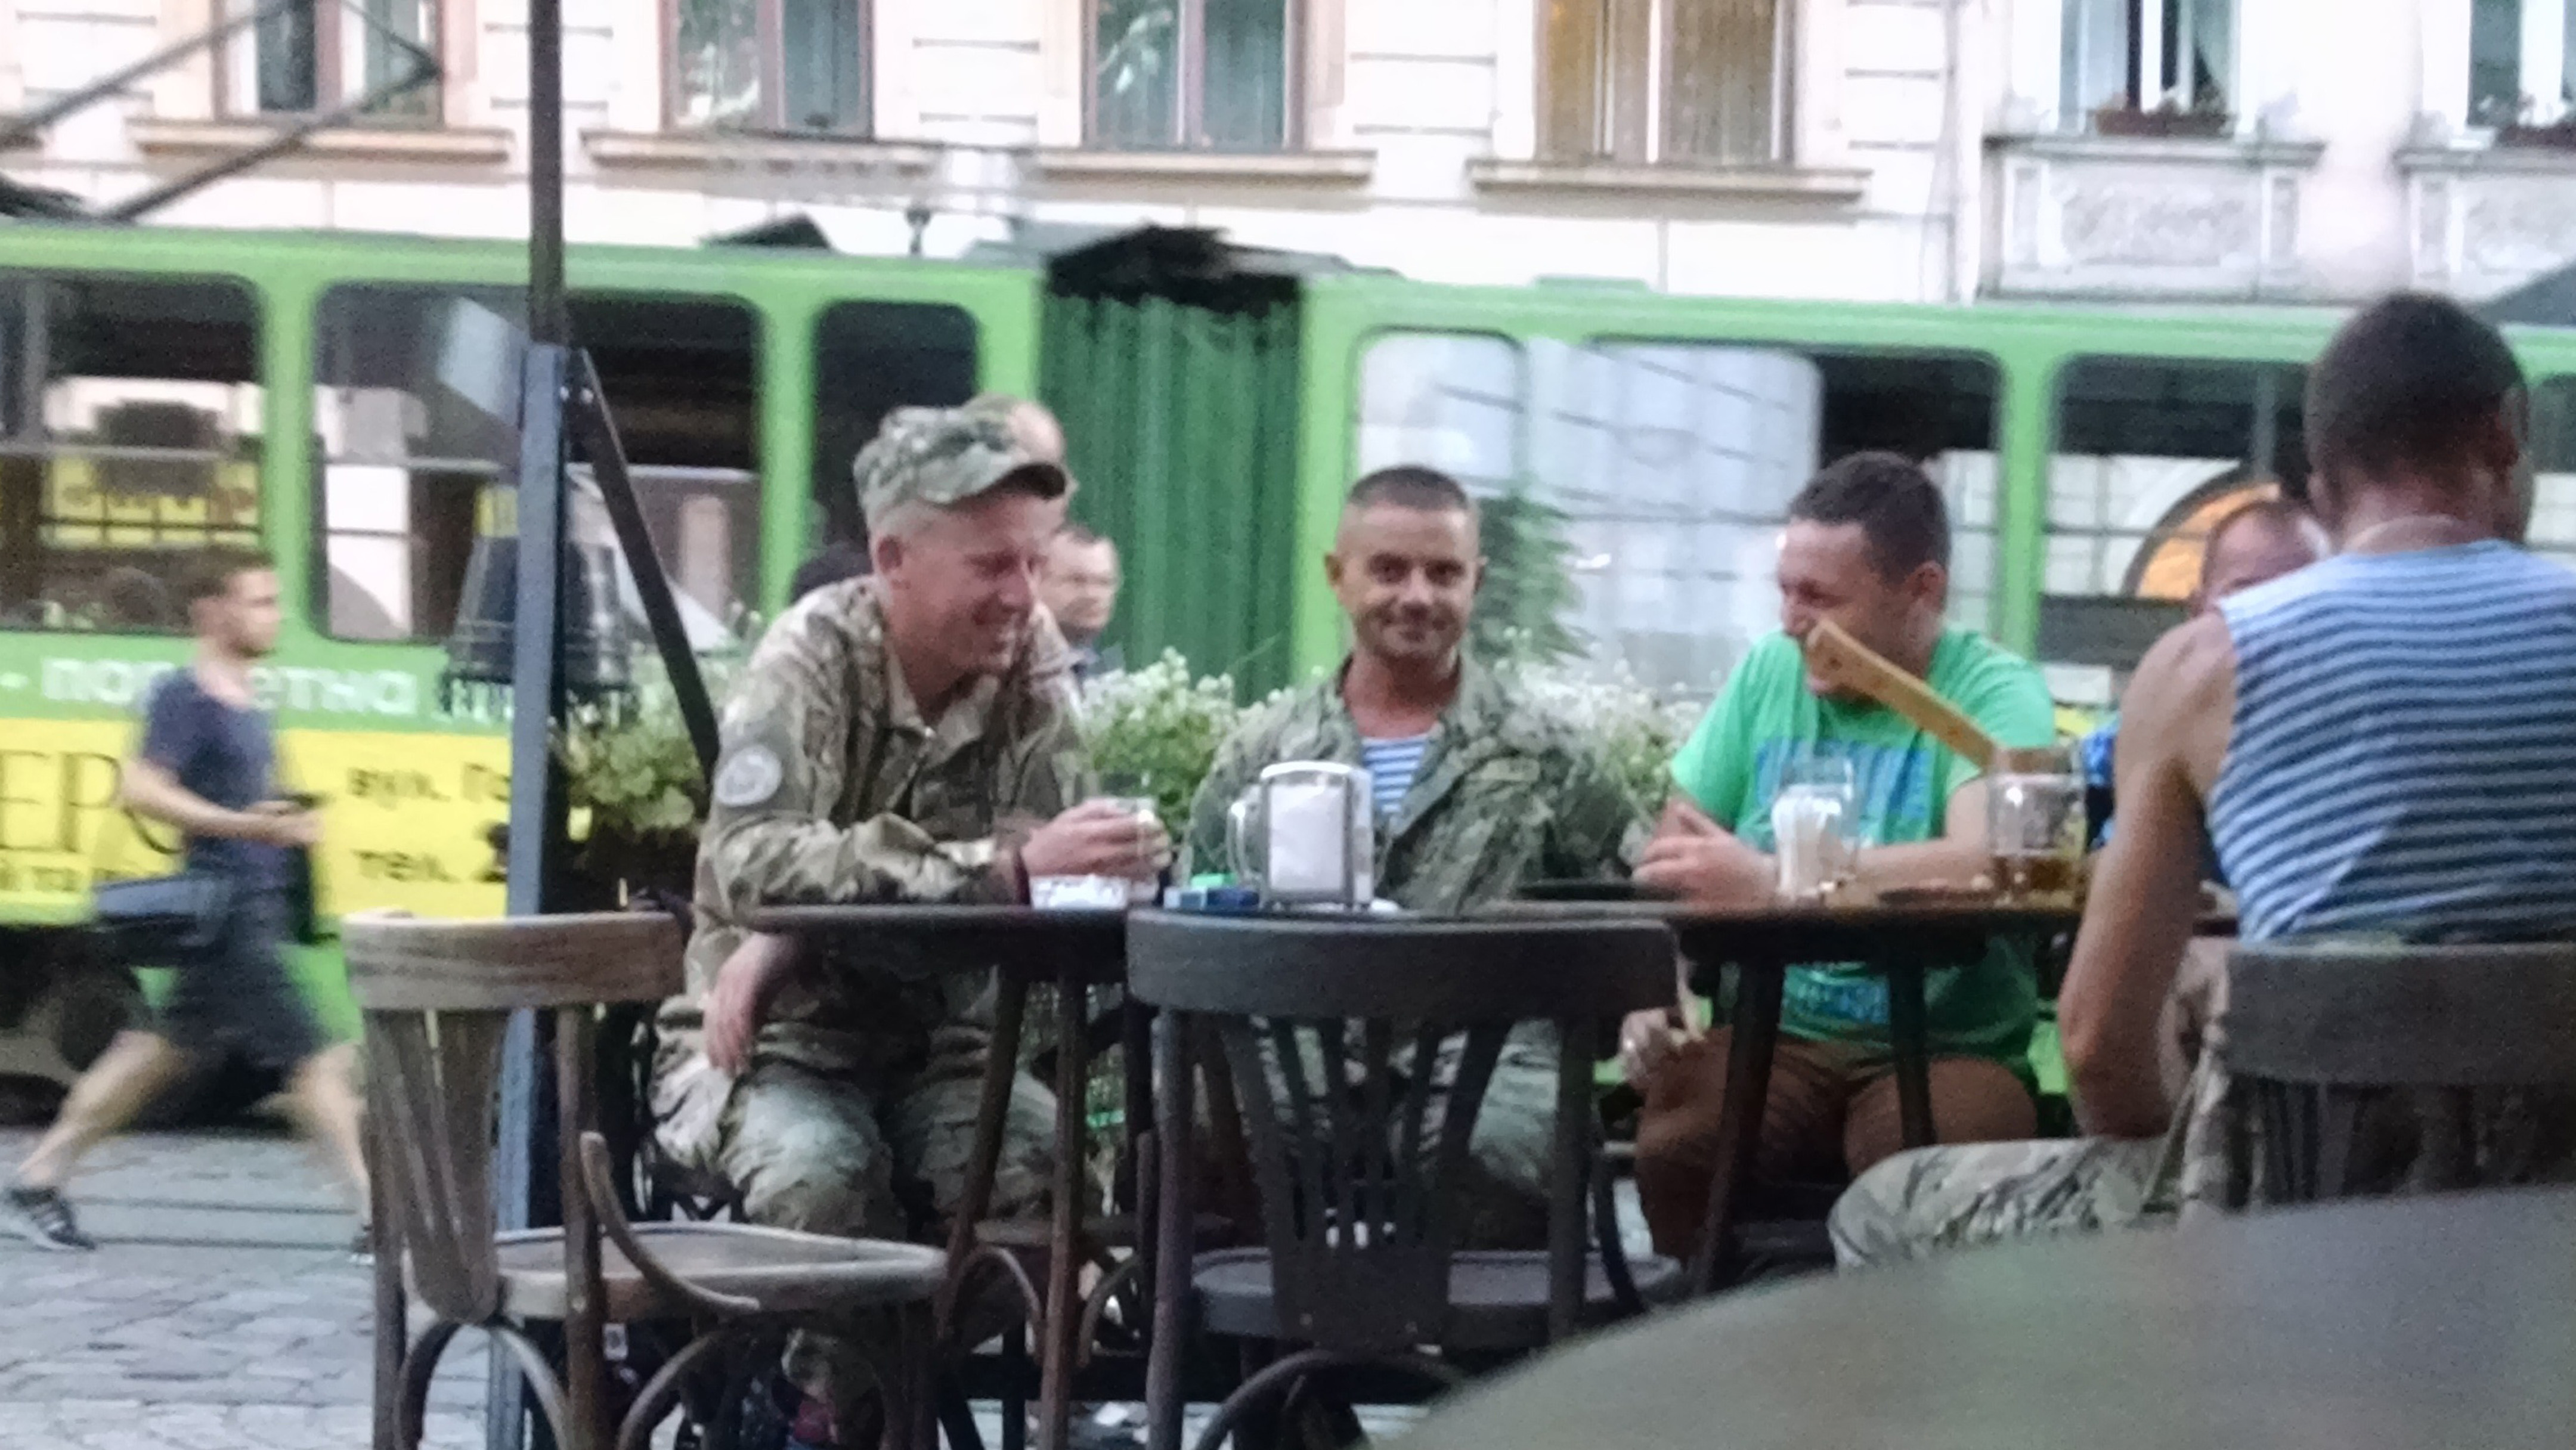 Soldiers at Lviv cafe